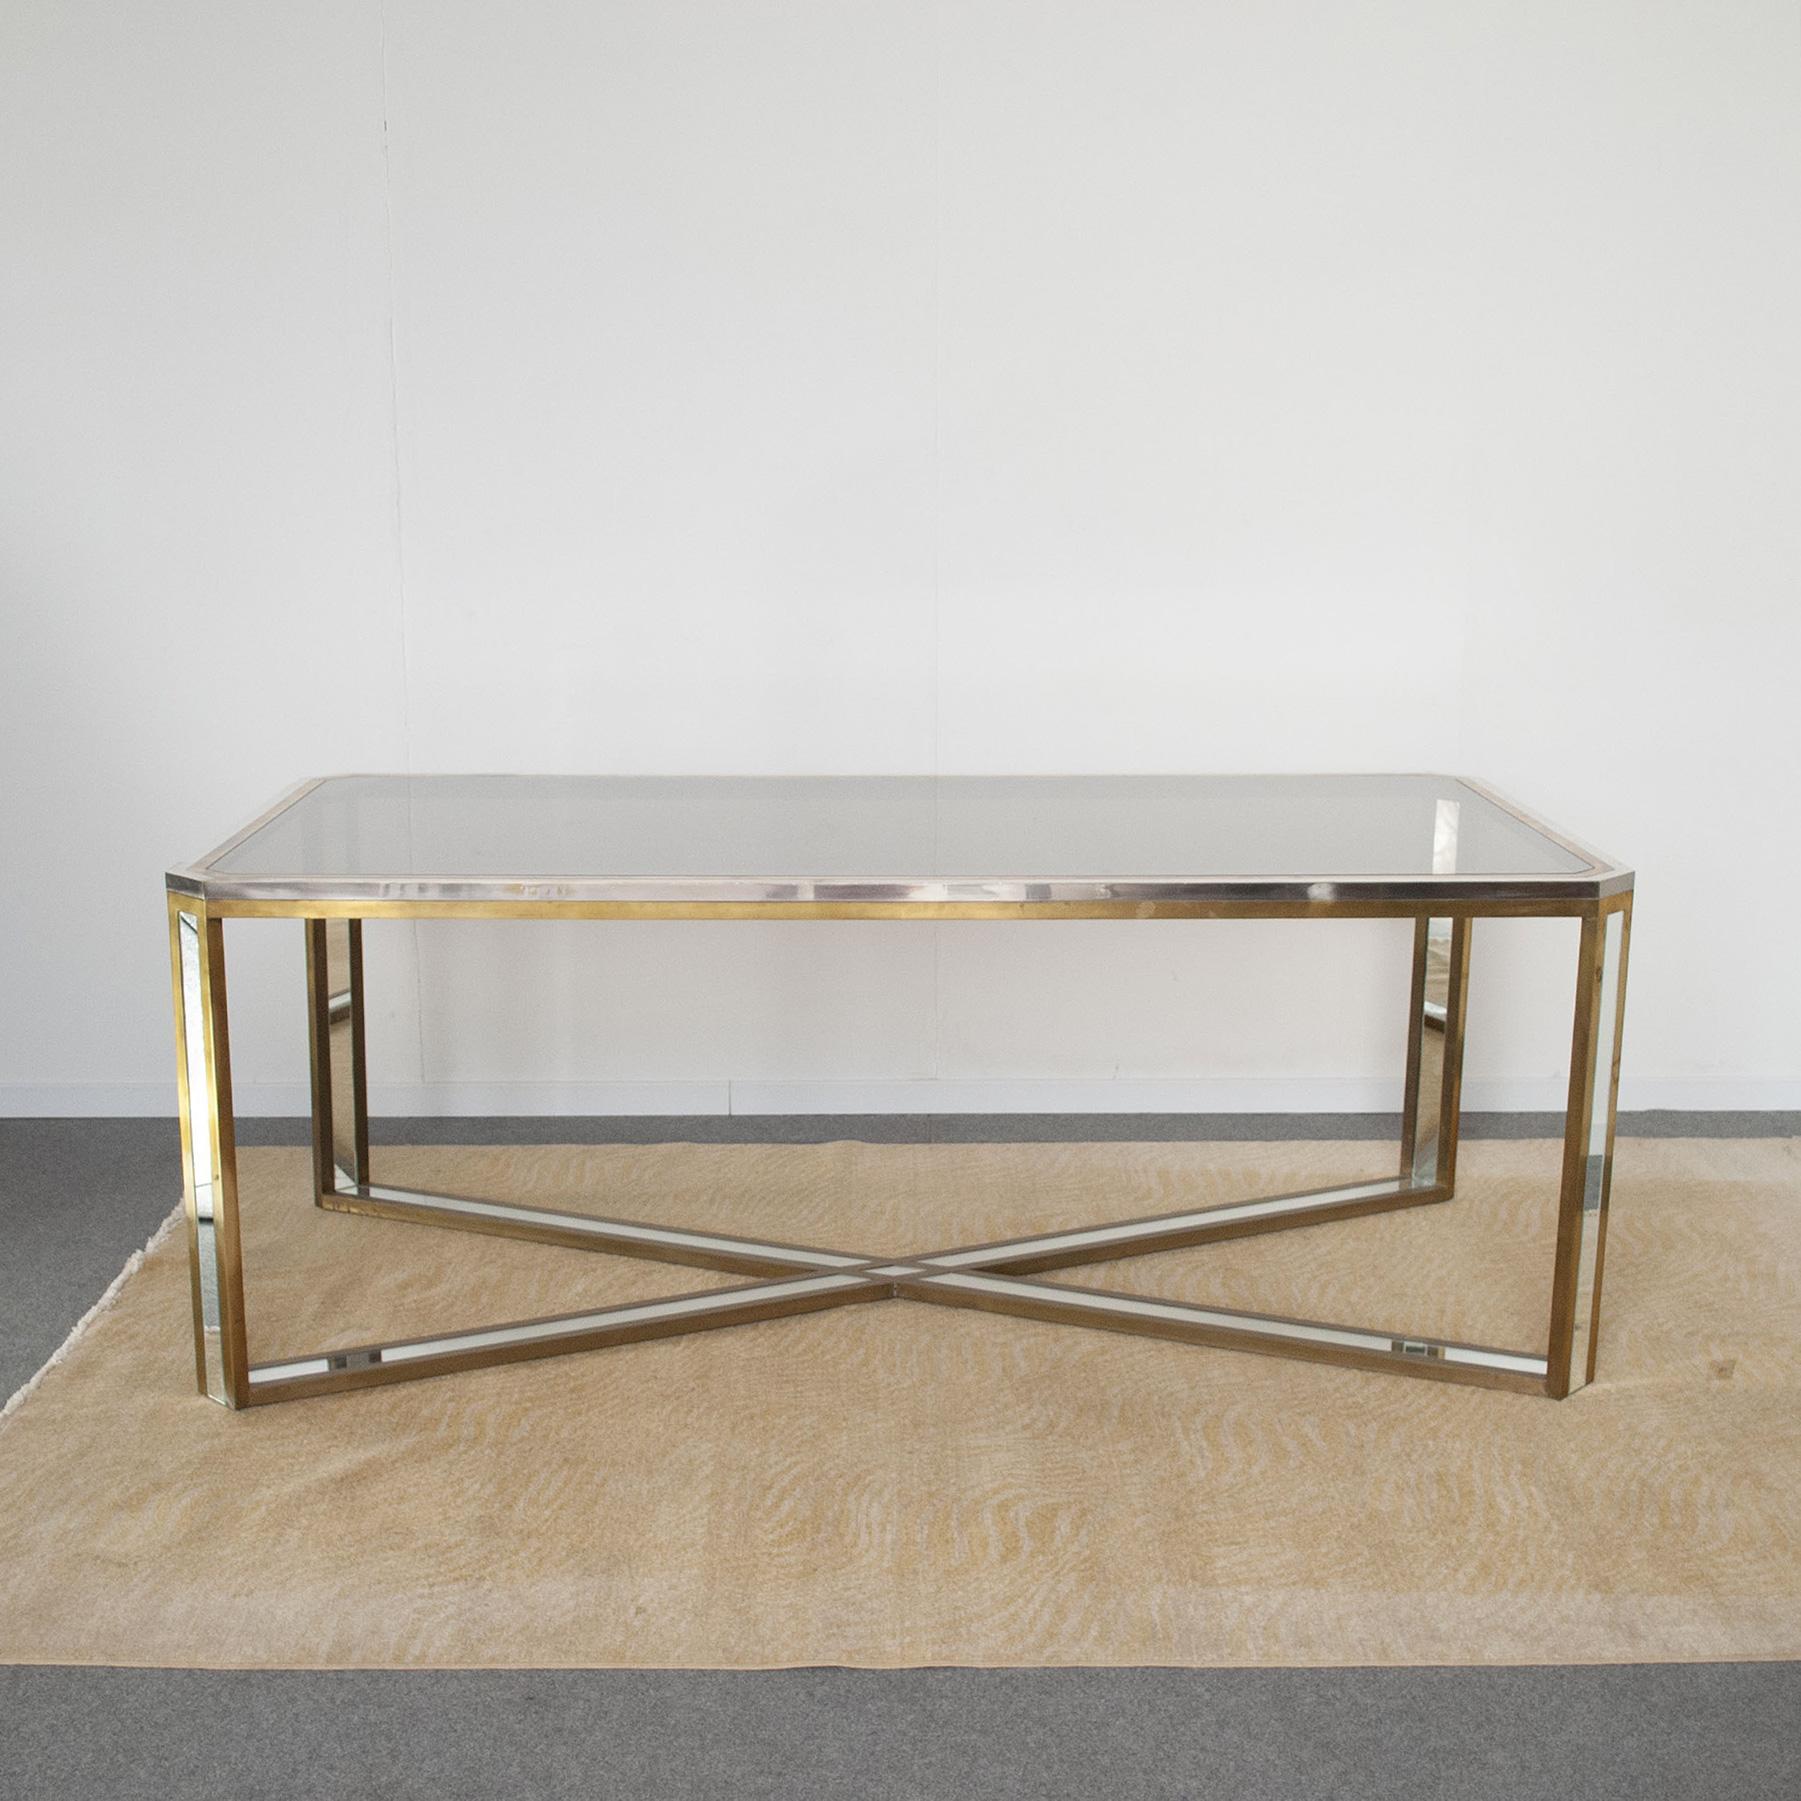 Romeo Rega 1970s Italian Midcentury Table in Stainless Steel, brass and Mirror For Sale 8